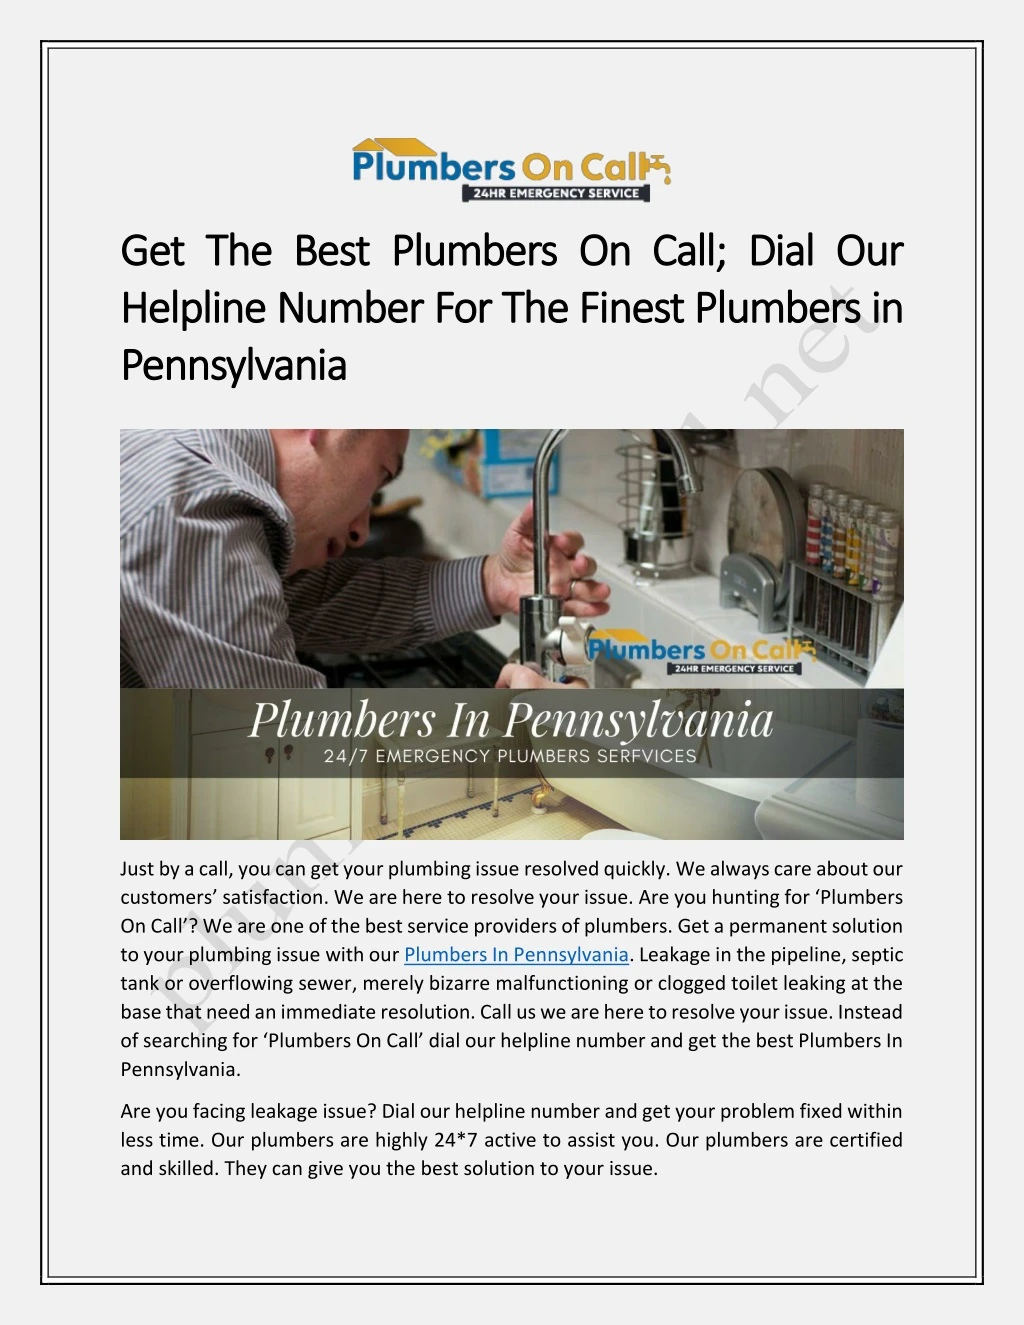 get the best plumbers on call dial